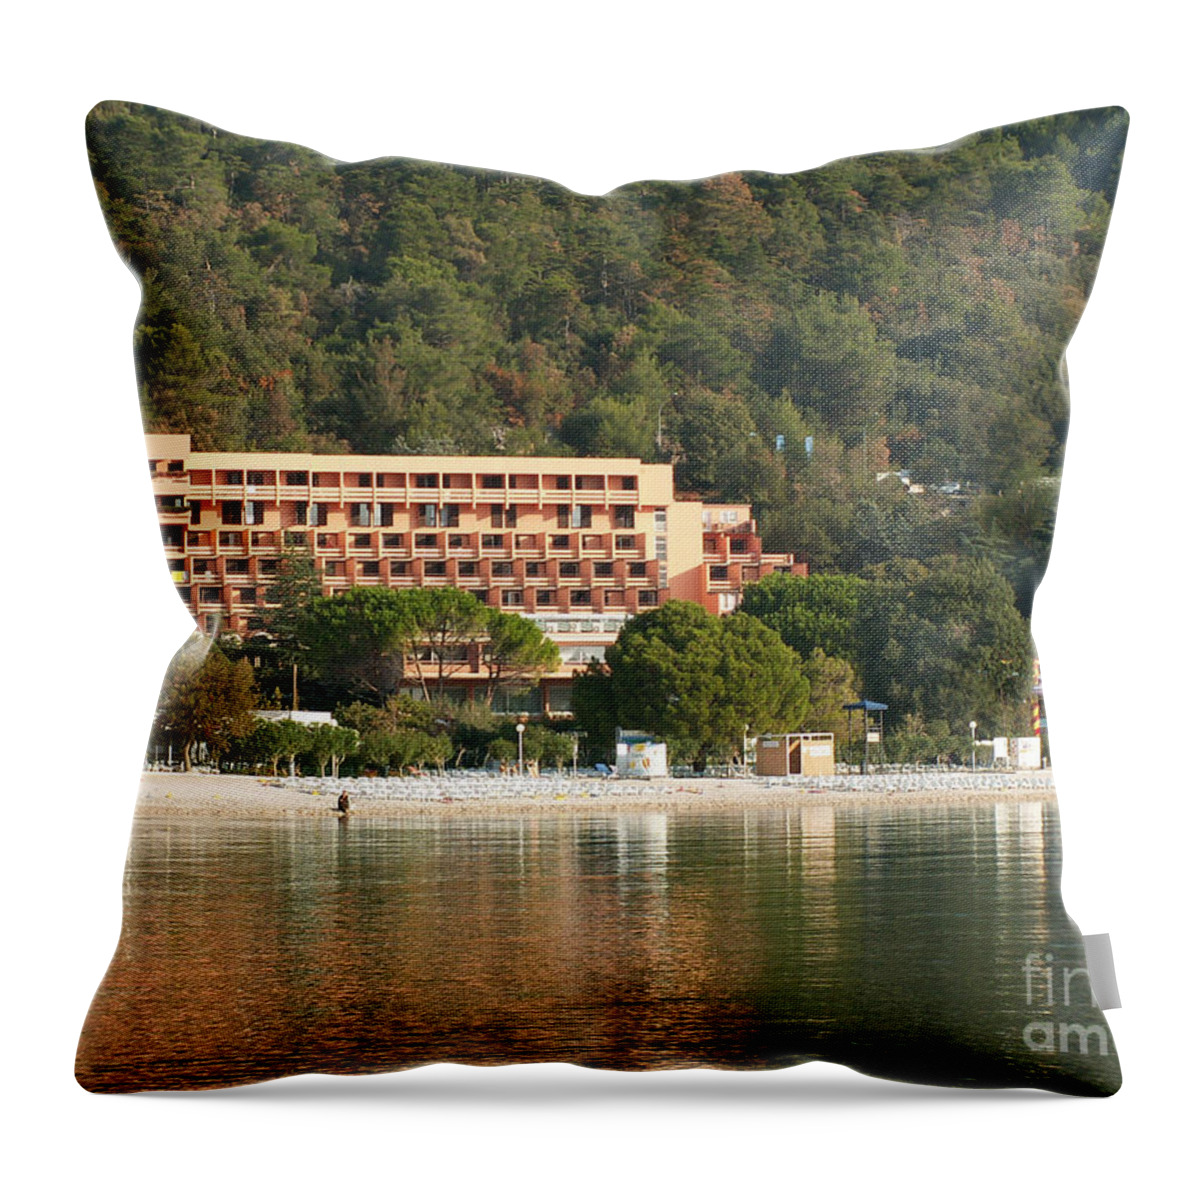 Croatia Throw Pillow featuring the photograph Resort #1 by Evgeny Pisarev